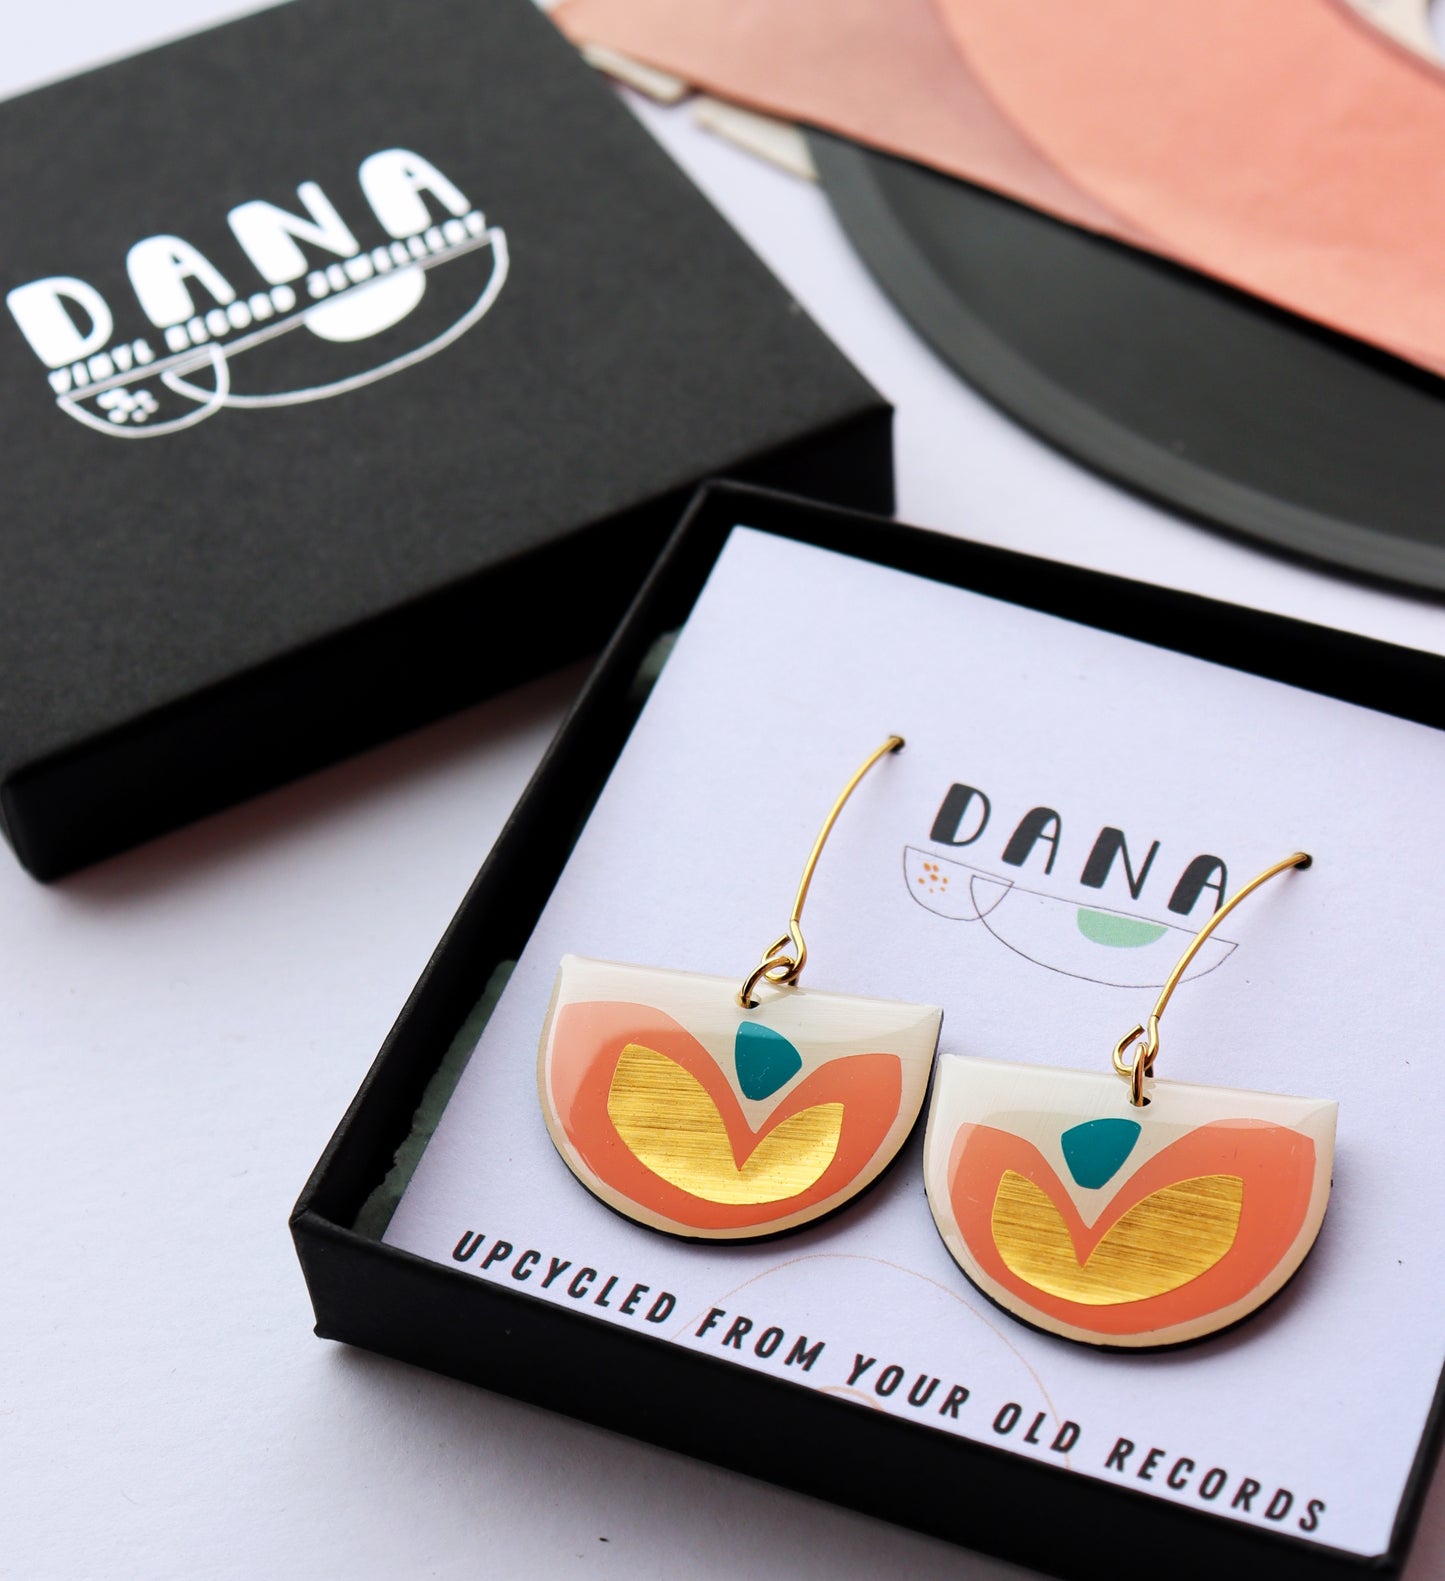 FLOR earrings in warm pink & gold with a pop of teal / upcycled from your old records